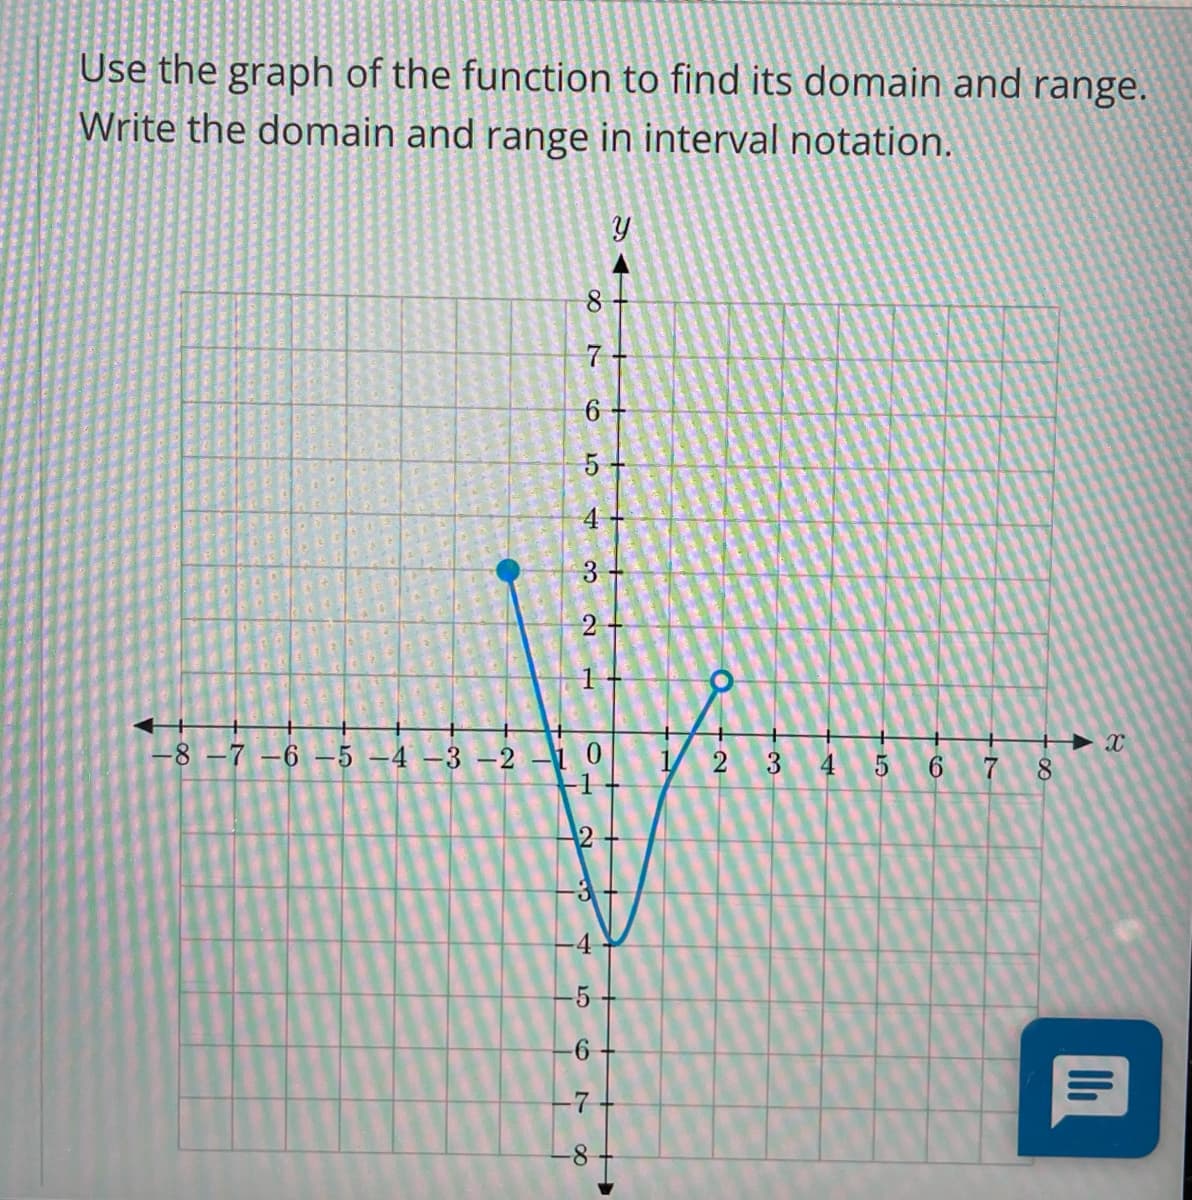 Use the graph of the function to find its domain and range.
Write the domain and range in interval notation.
8.
6.
4
-8 -7 –6 –5 -4 -3 –2 -10
-1
1.
3
6 7
8.
-5
-7-
3.
2.
12
4.
6.
